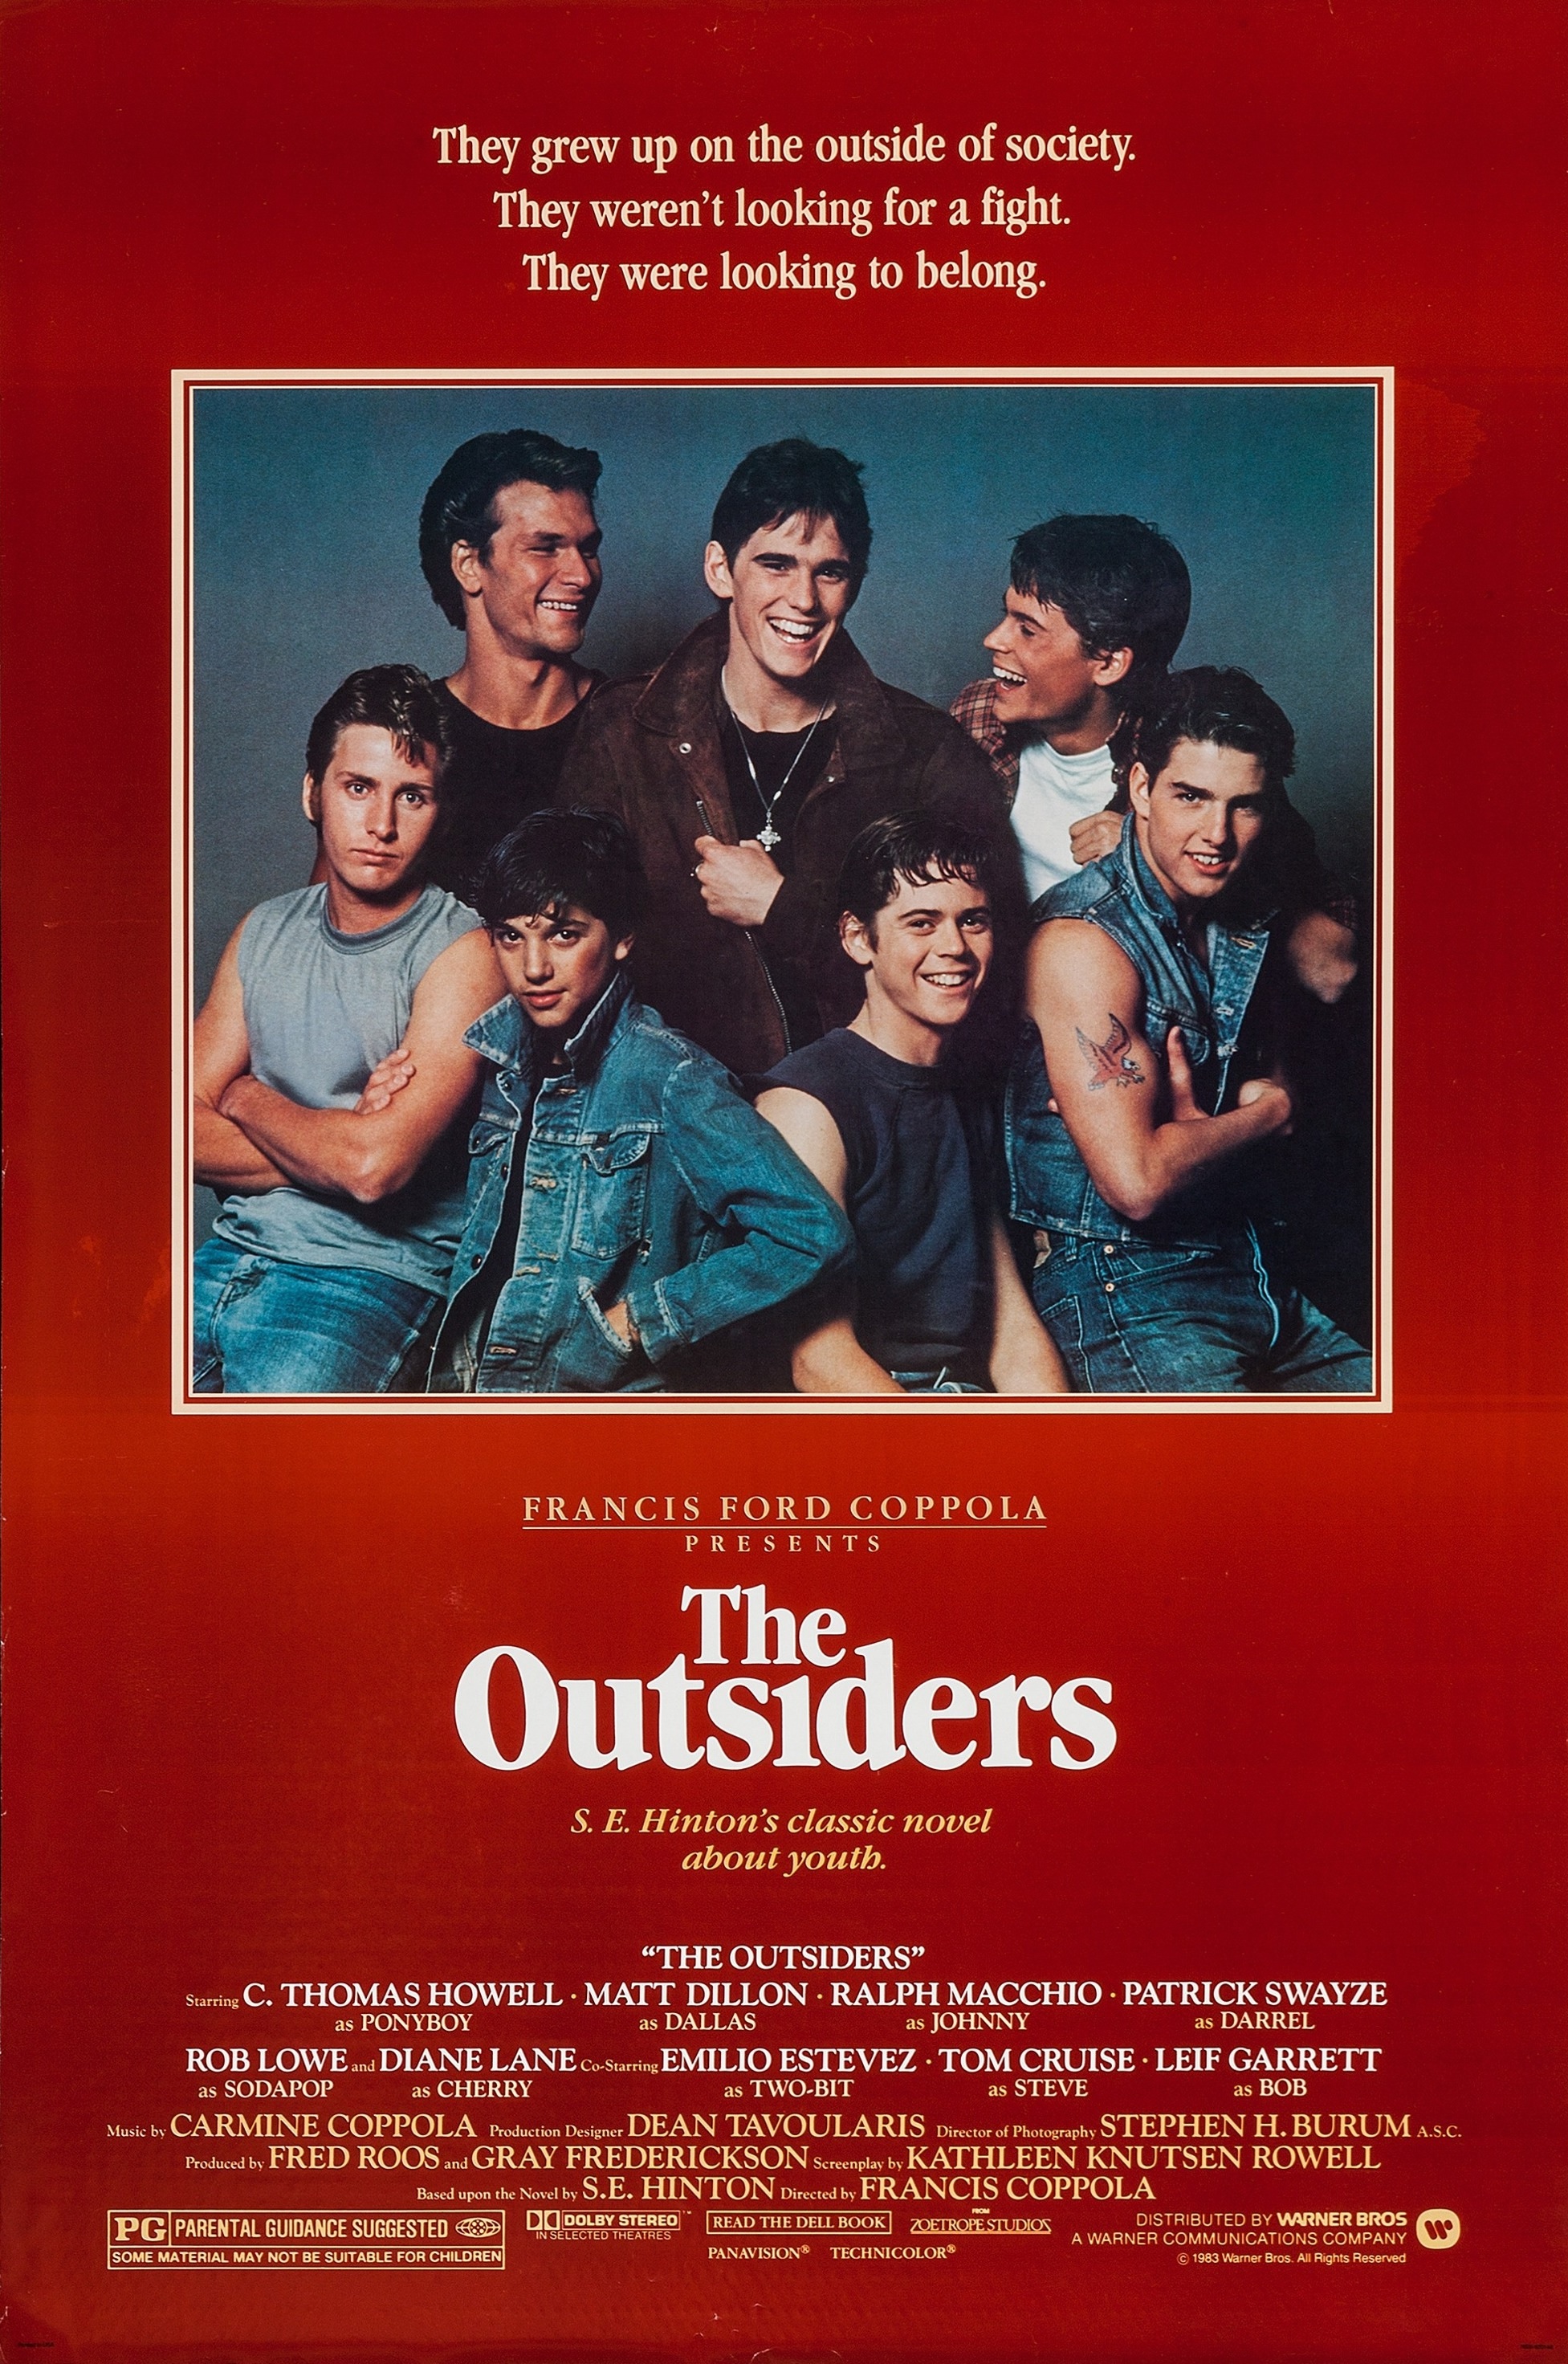 The Outsiders (film) Warner Bros photo photo